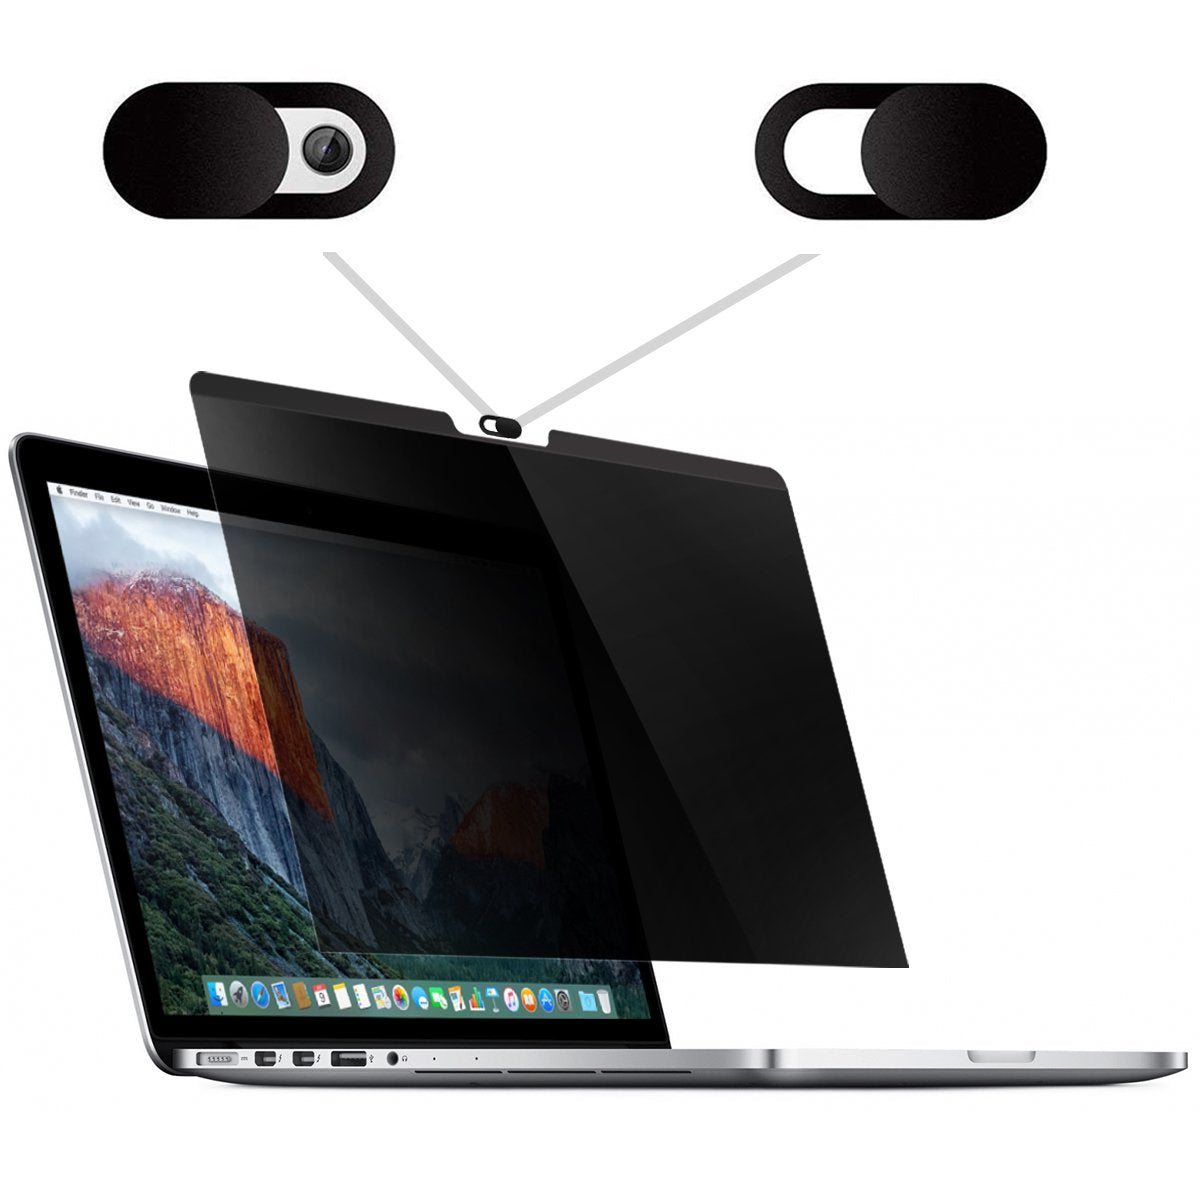 Magnetic Privacy Filter for Macbook, Comes with Camera Cover Slide, Provide Privacy, Anti-Blue Light and Anti-Glare